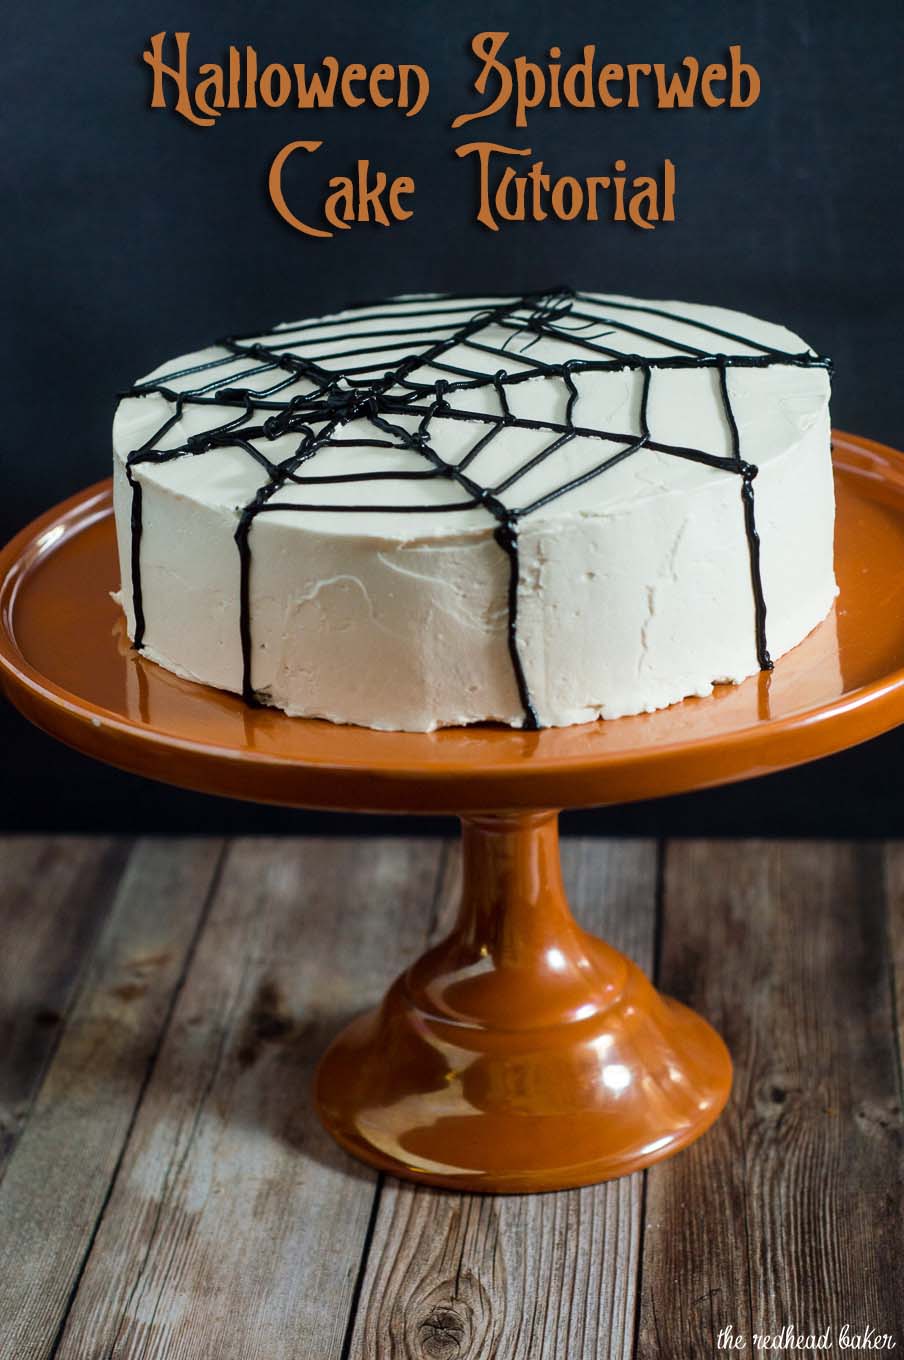 Scare up some fun with this spooky Halloween Spiderweb Cake. It involves basic piping techniques, so it's easy enough for beginner cake decorators!